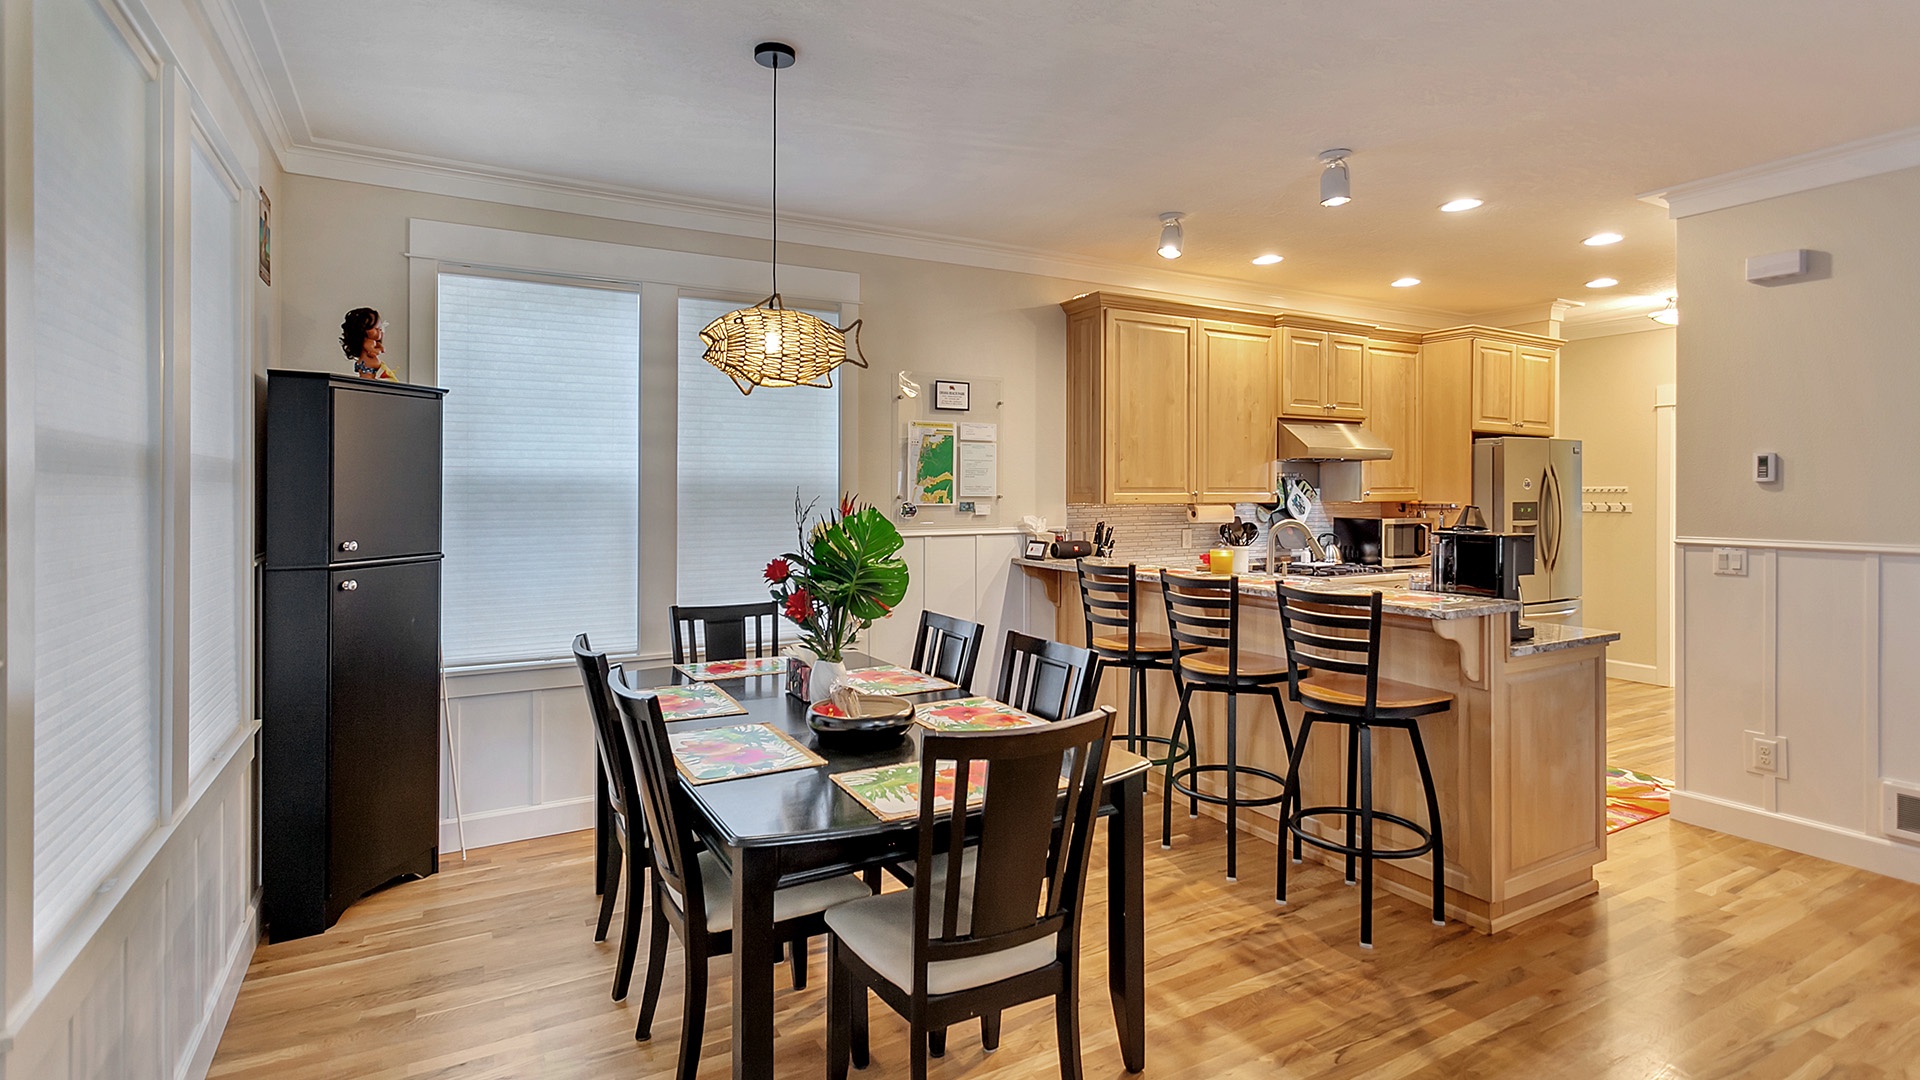 Lincoln City Vacation Rentals, Ohana Beach Park - The kitchen overlooks the dining area